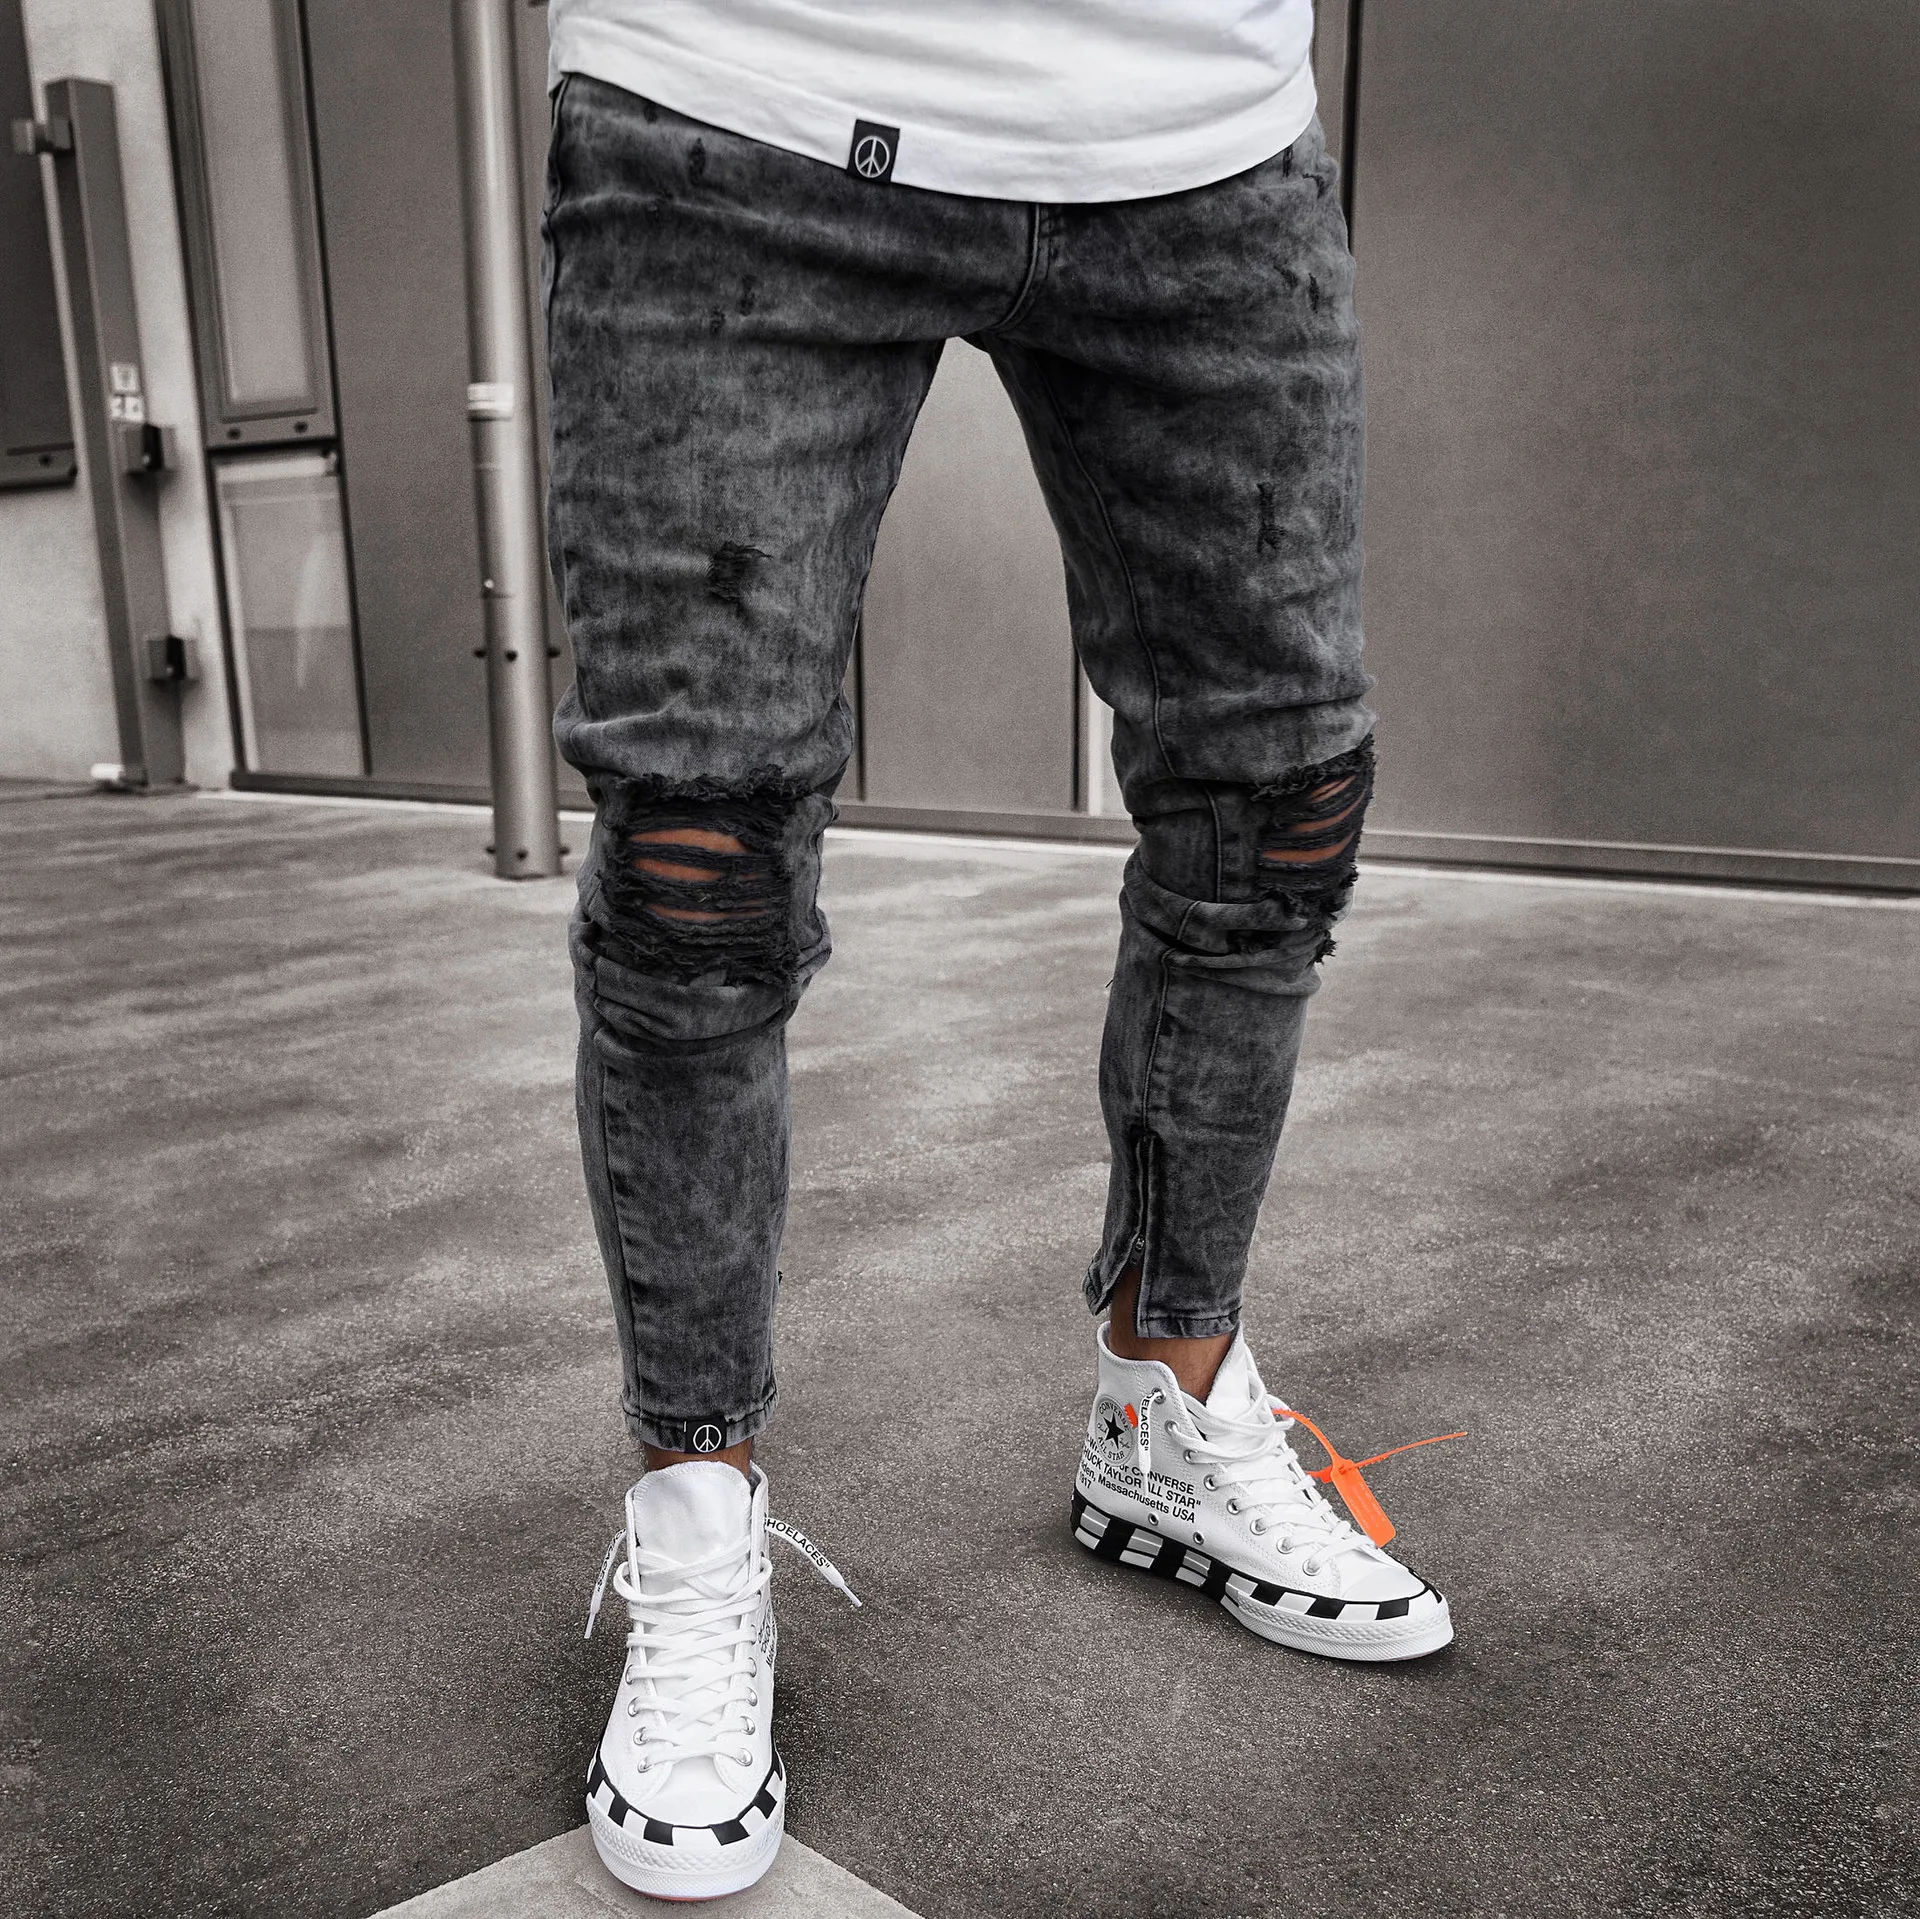 loose jeans Men's Casual Pants Slim Fit Fashion Zip-Up Skinny Jeans Men's Long Pants Outdoor Casual Pants tapered fit jeans